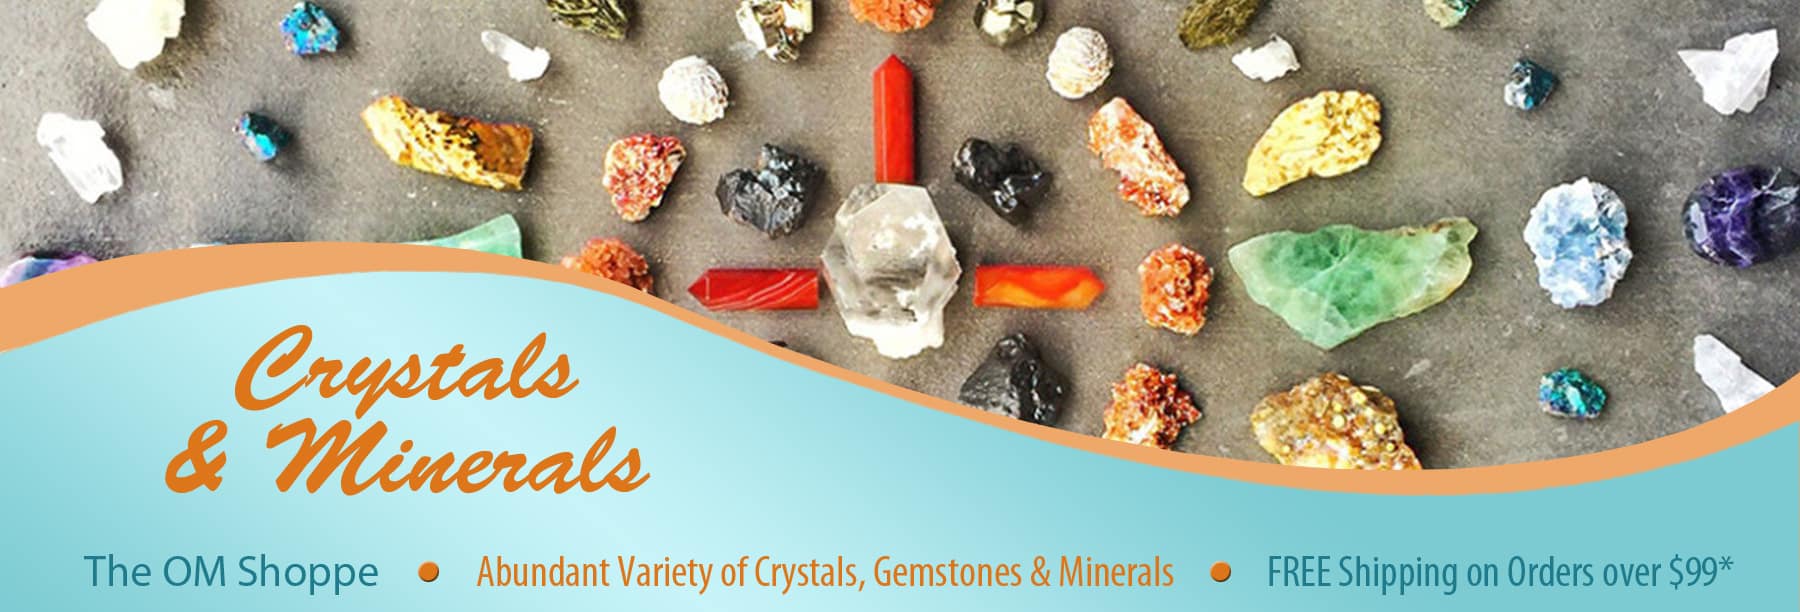 The OM Shoppe Crystals and Minerals